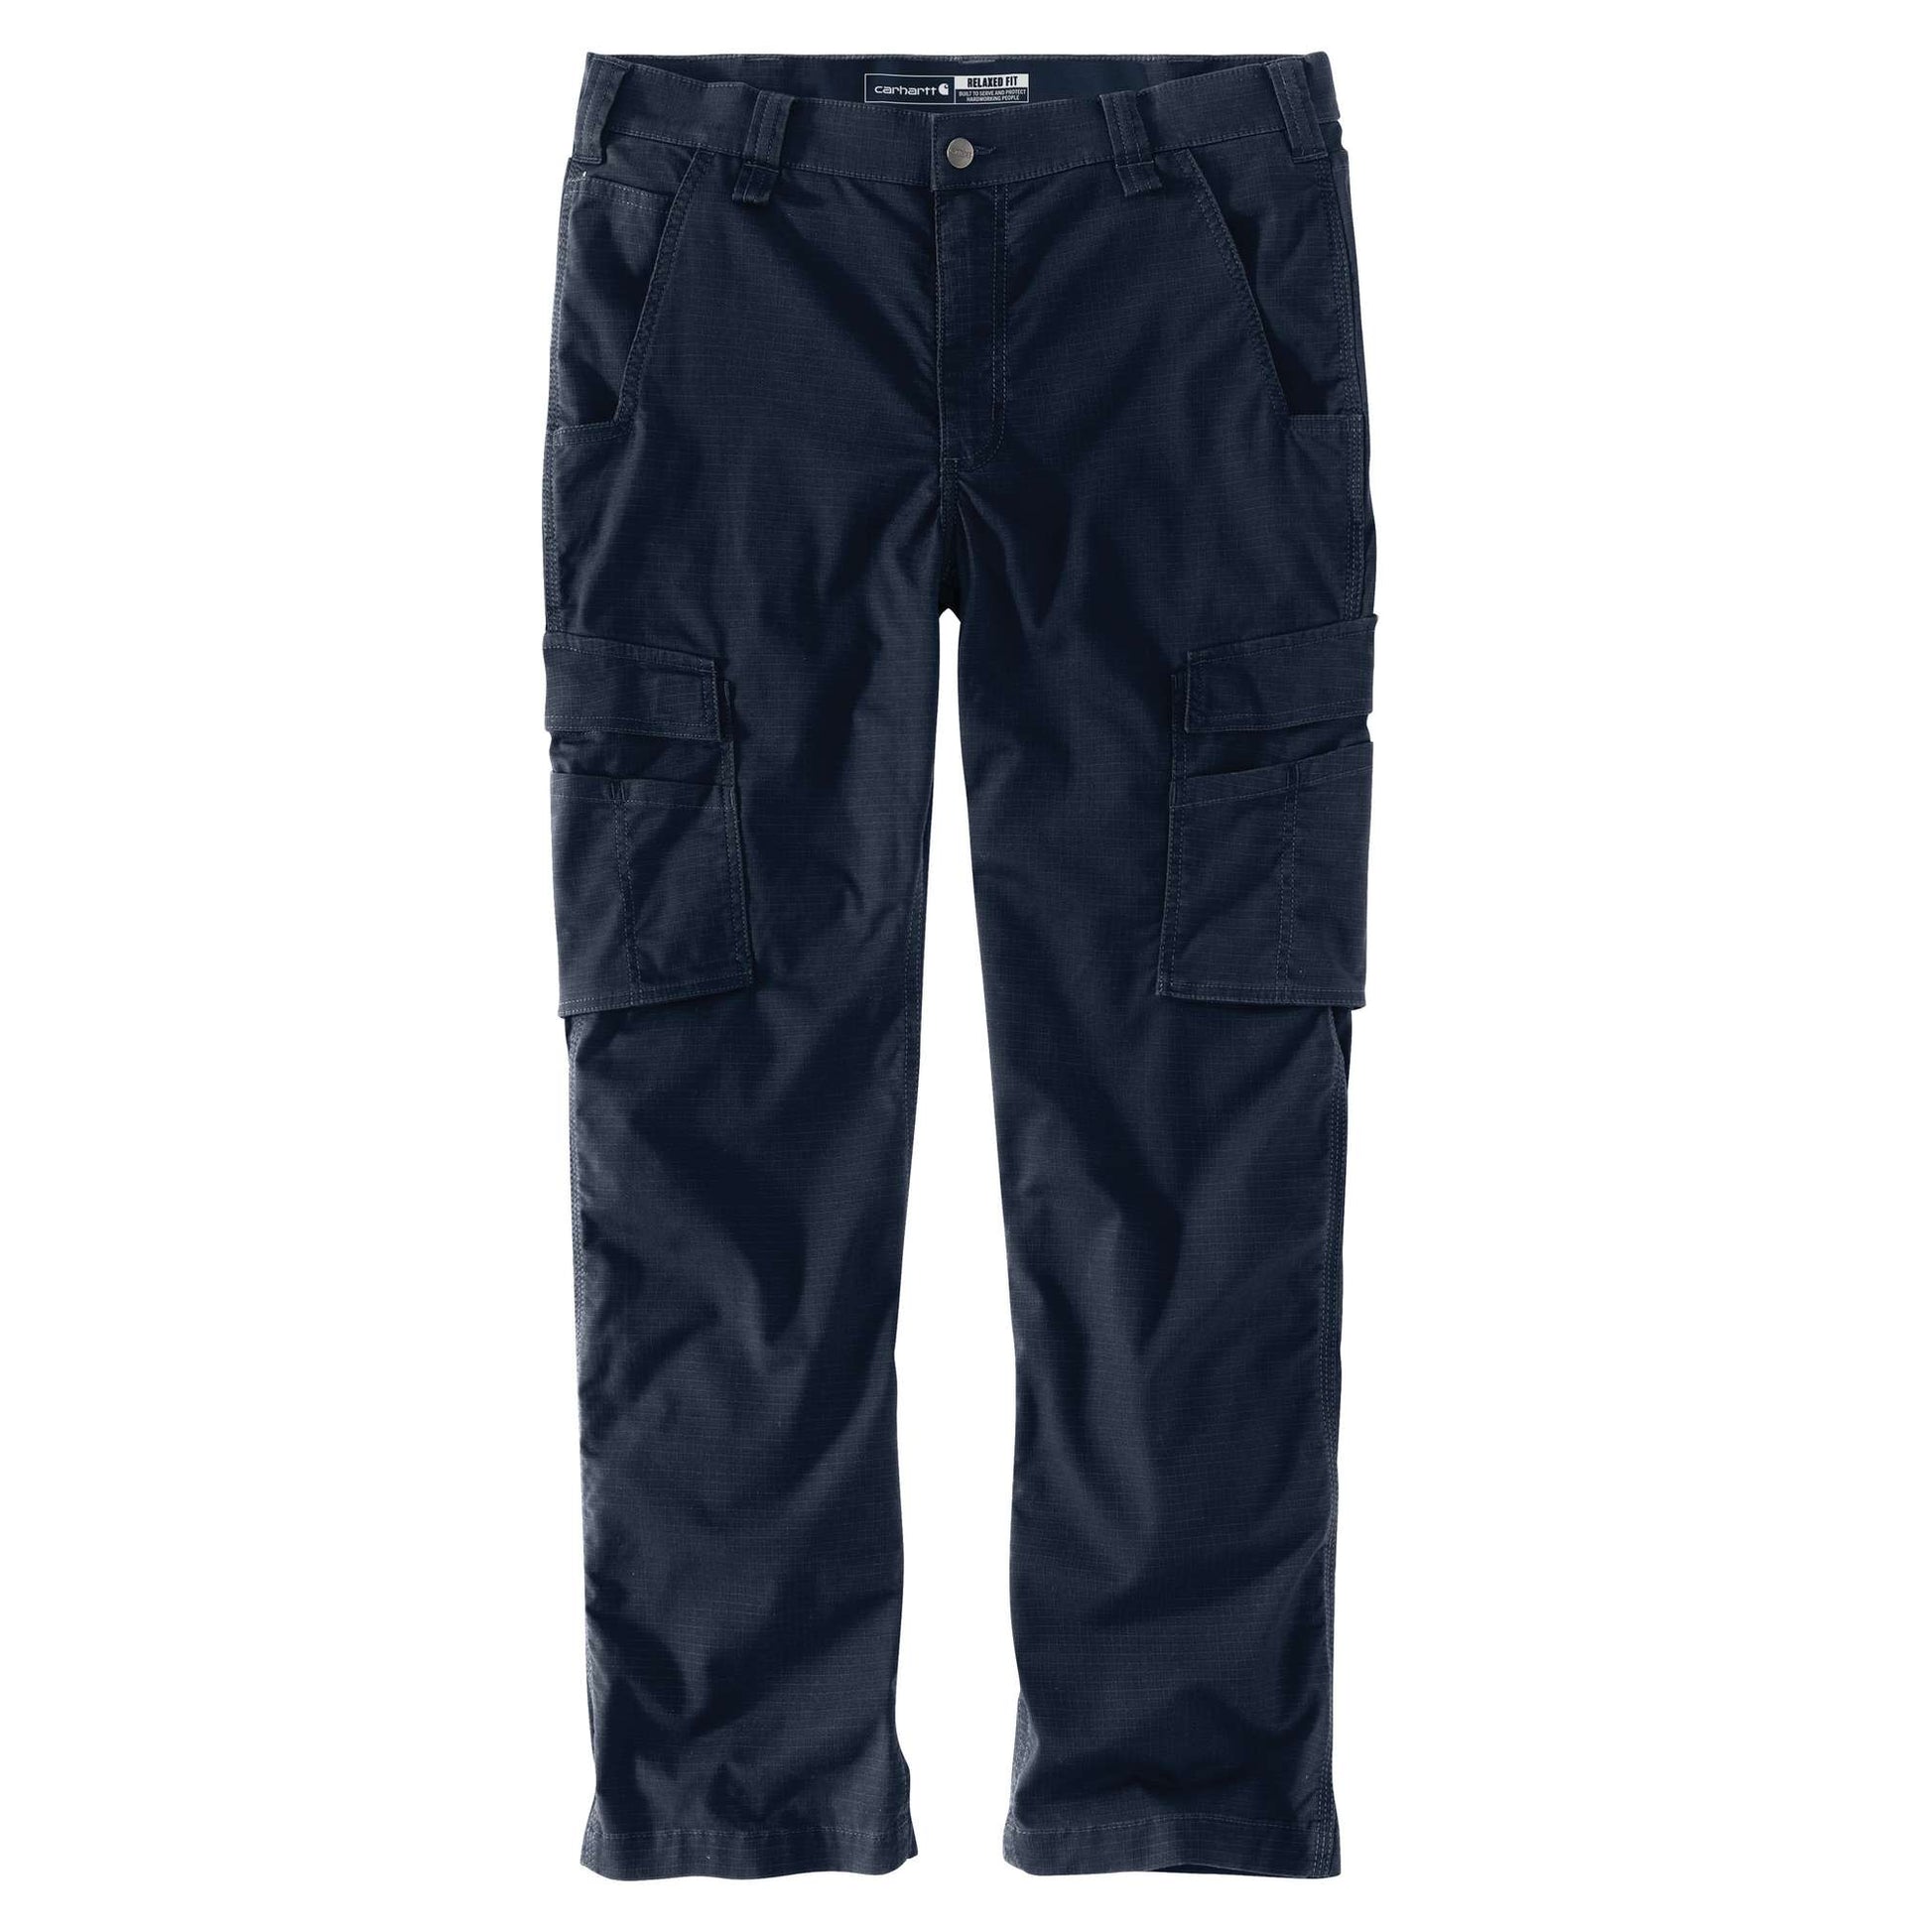 Carhartt 105296-DKHW35L32 Force Relaxed Fit Ripstop Cargo Work Pant, D